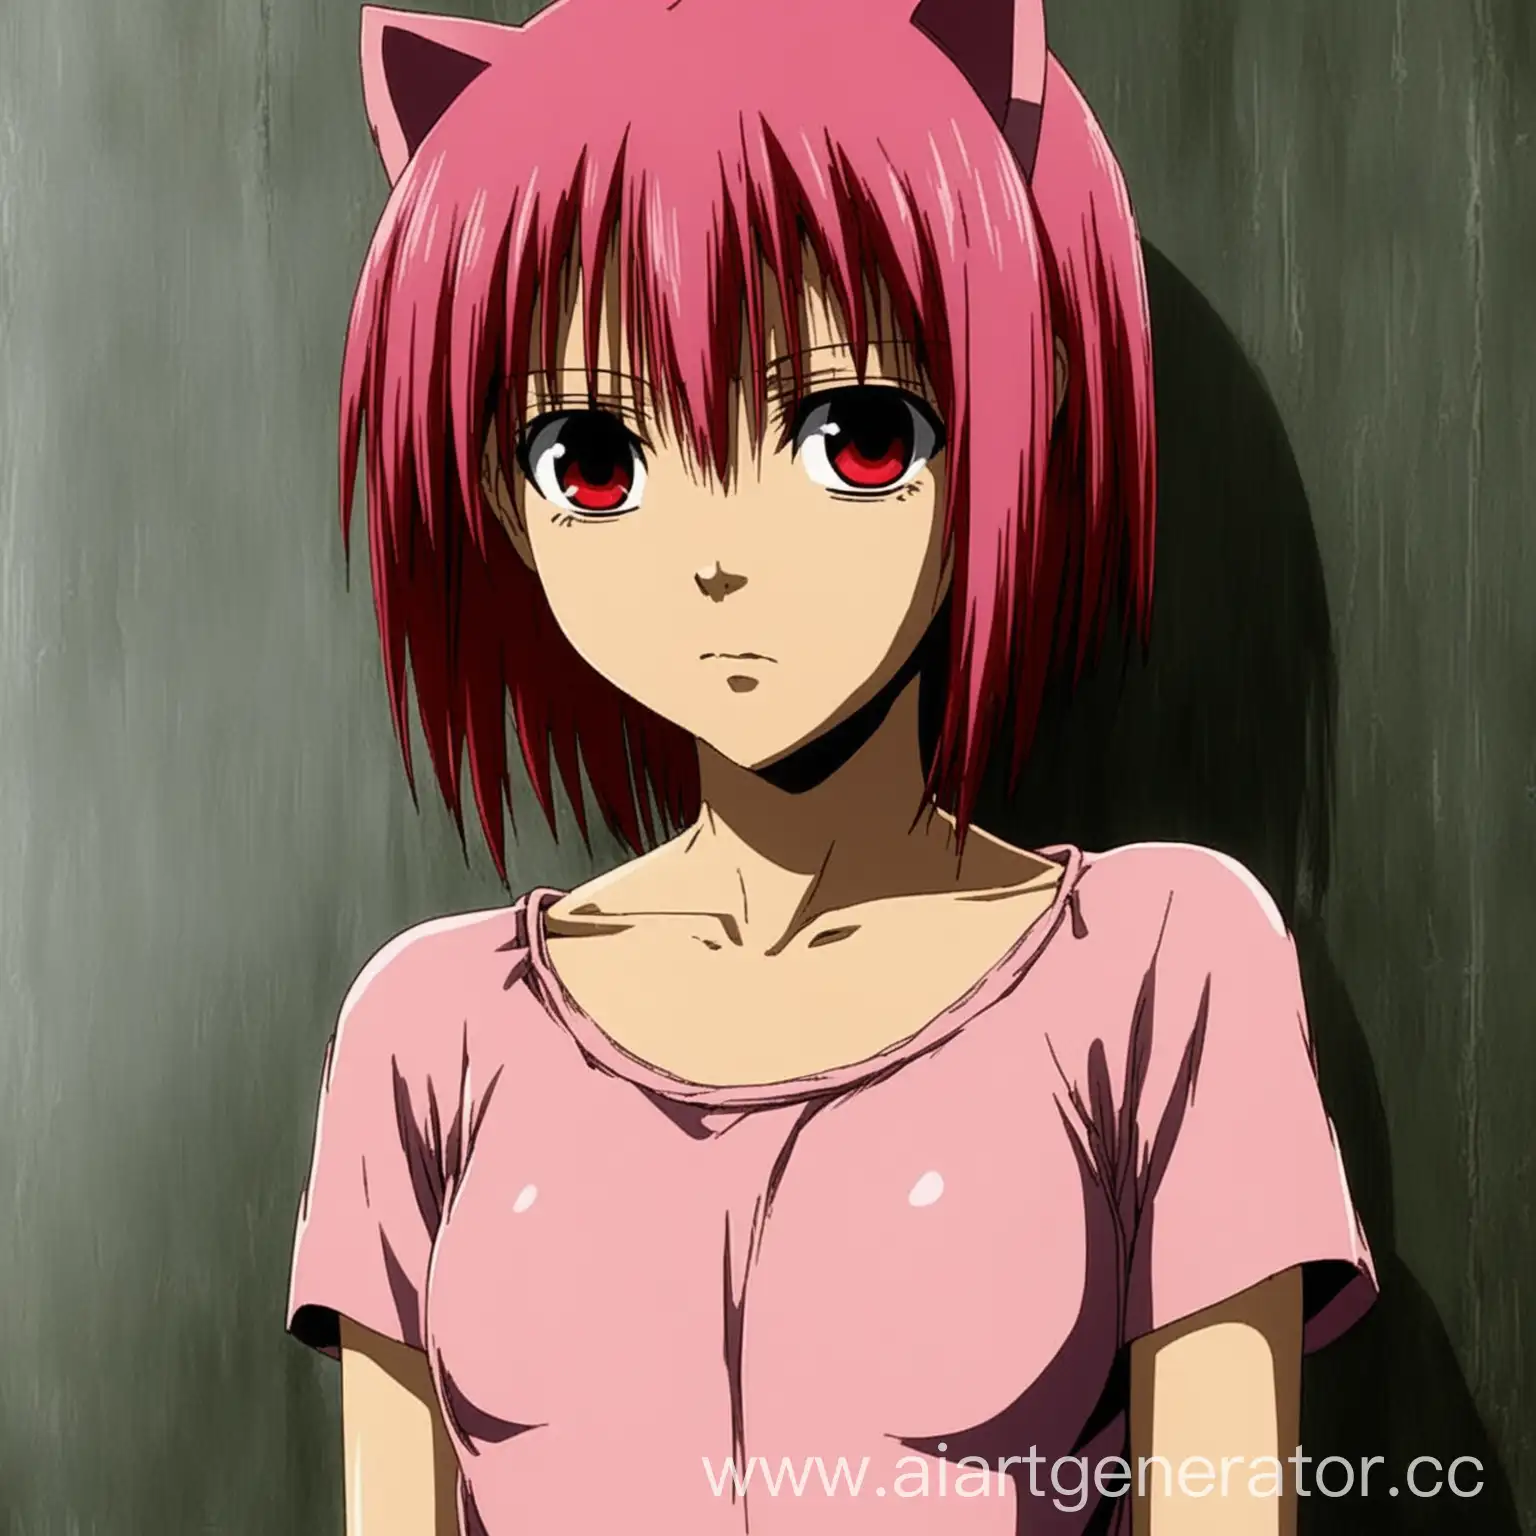 Lucy-Elfen-Lied-Anime-Character-Art